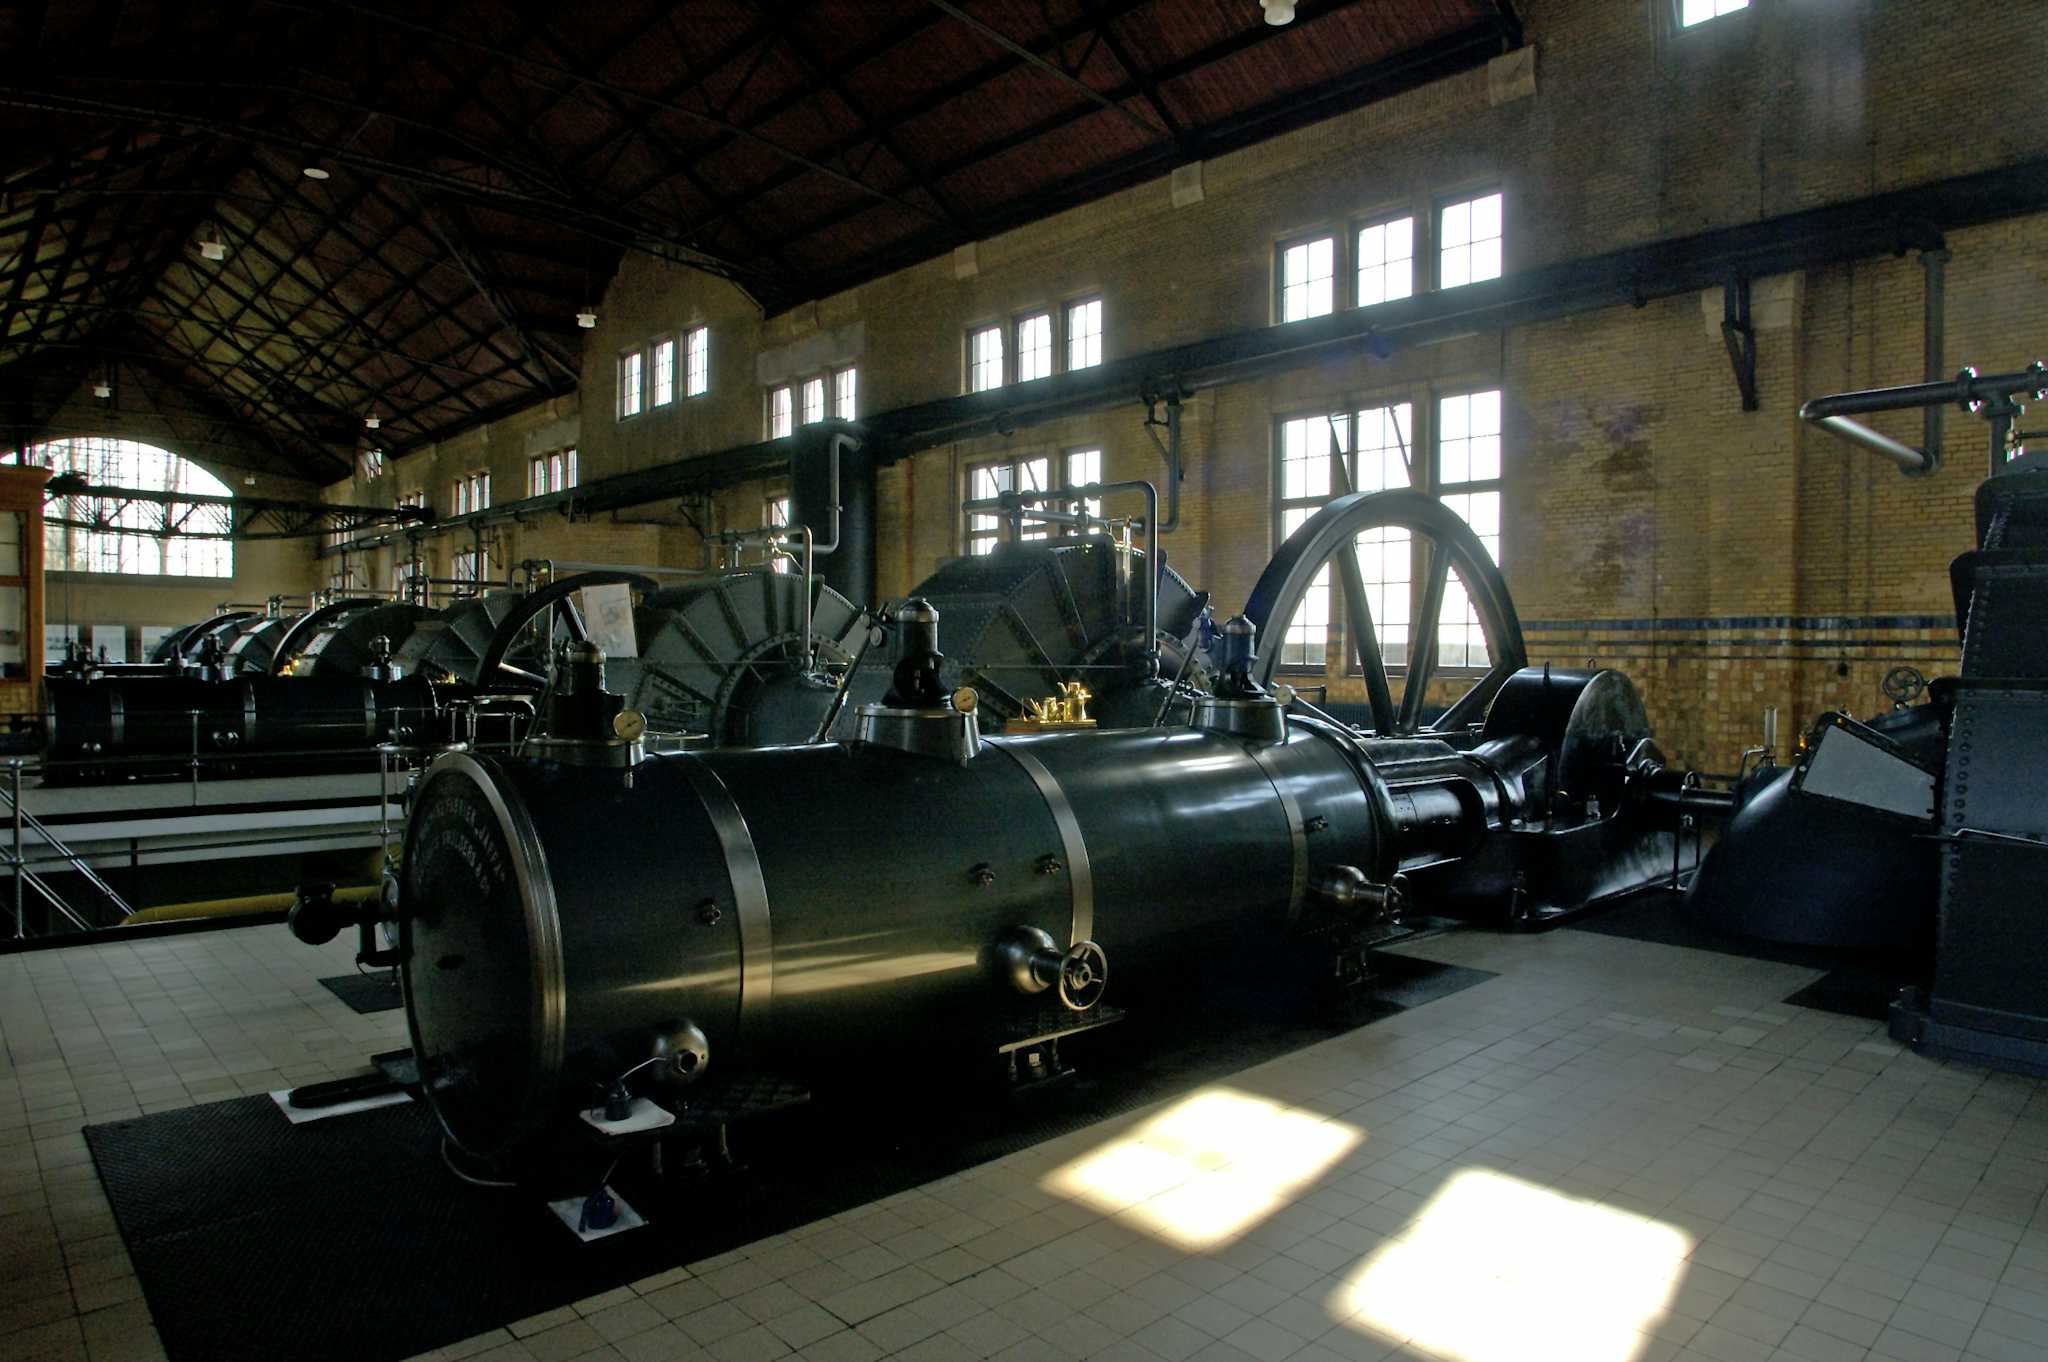 D.F. Wouda Steam Pumping Station